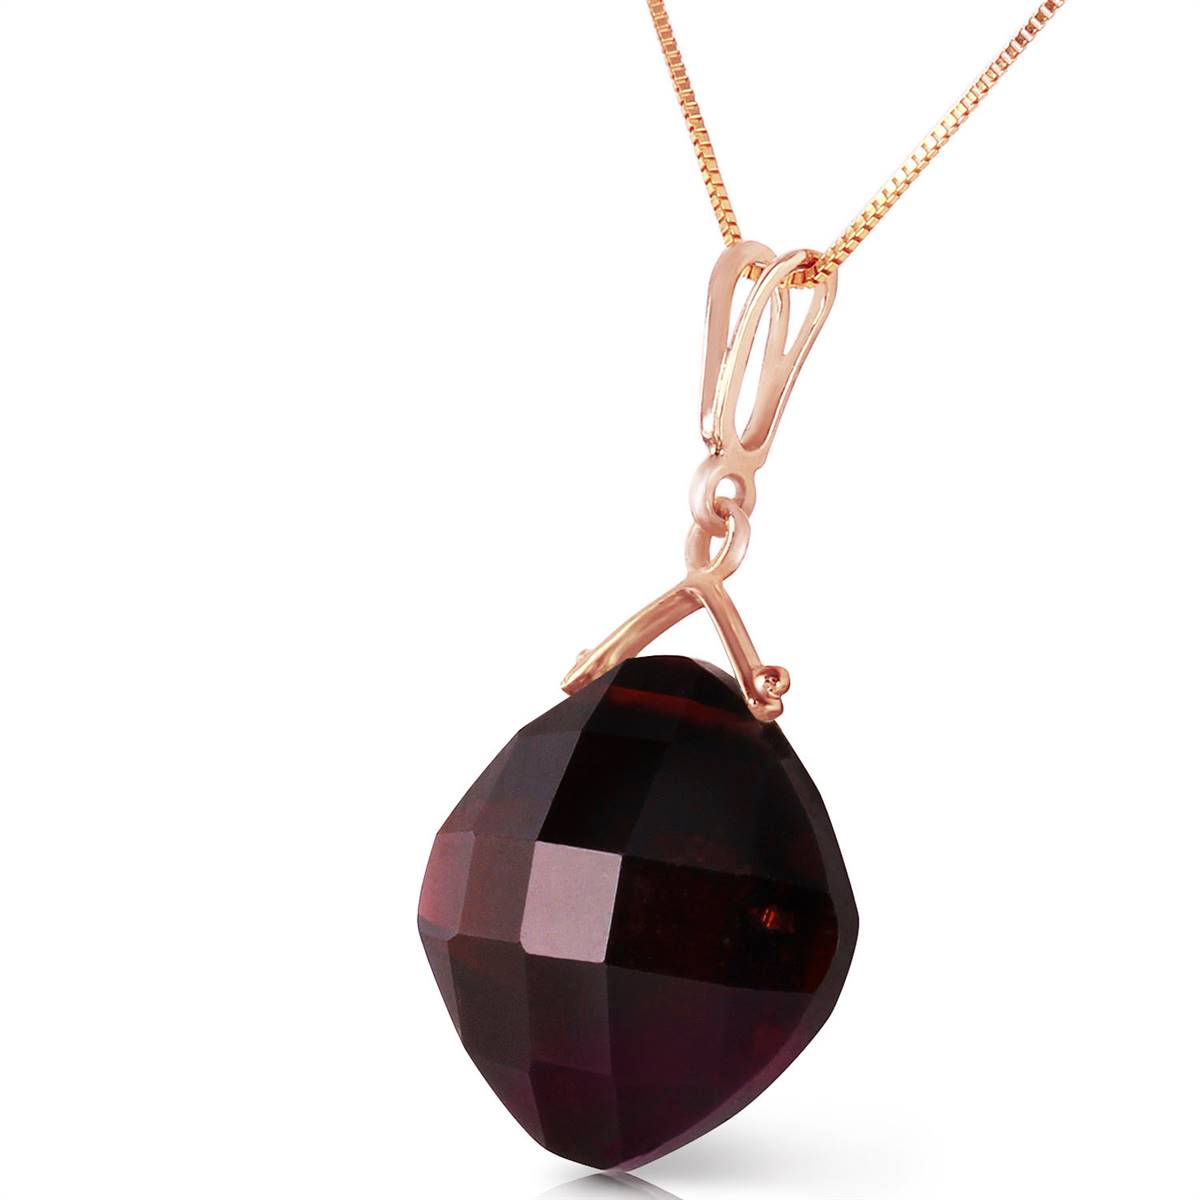 14K Solid Rose Gold Necklace w/ Natural Checkerboard Cut Garnet